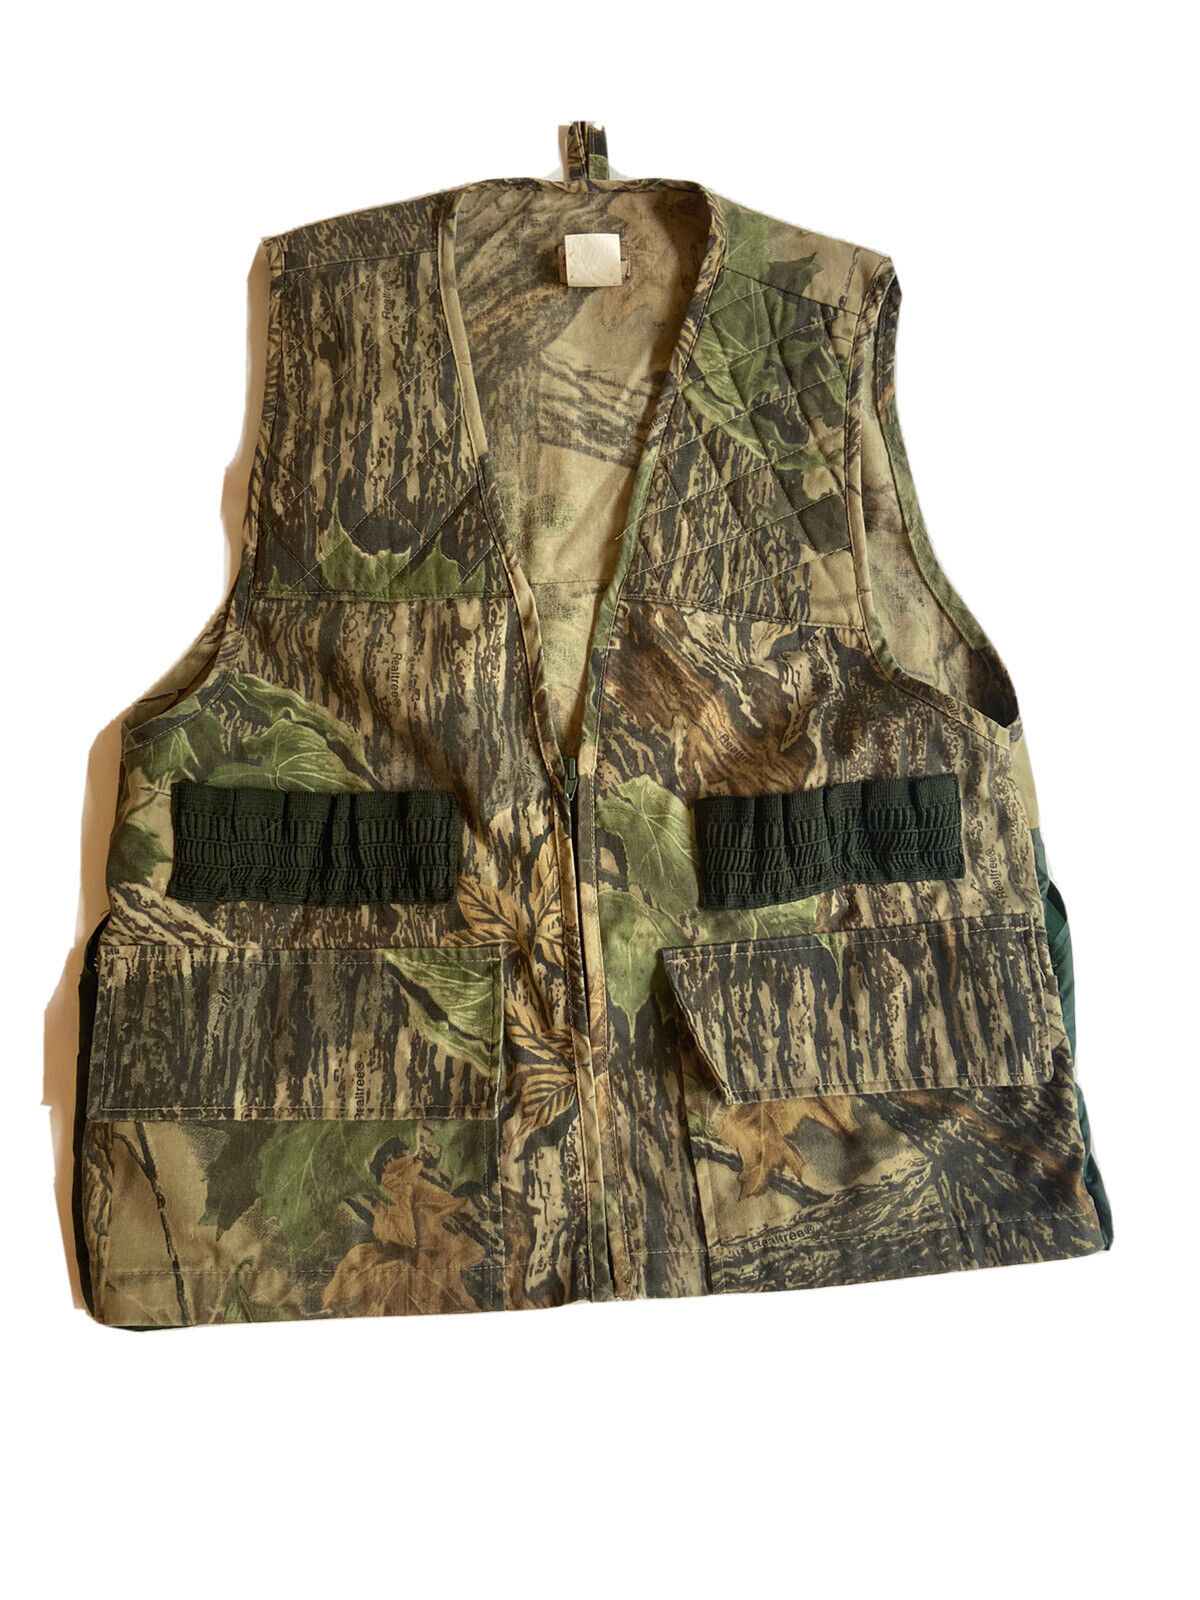 Vintage Sports Afield Upland Vest In Realtree Camouflage, Small